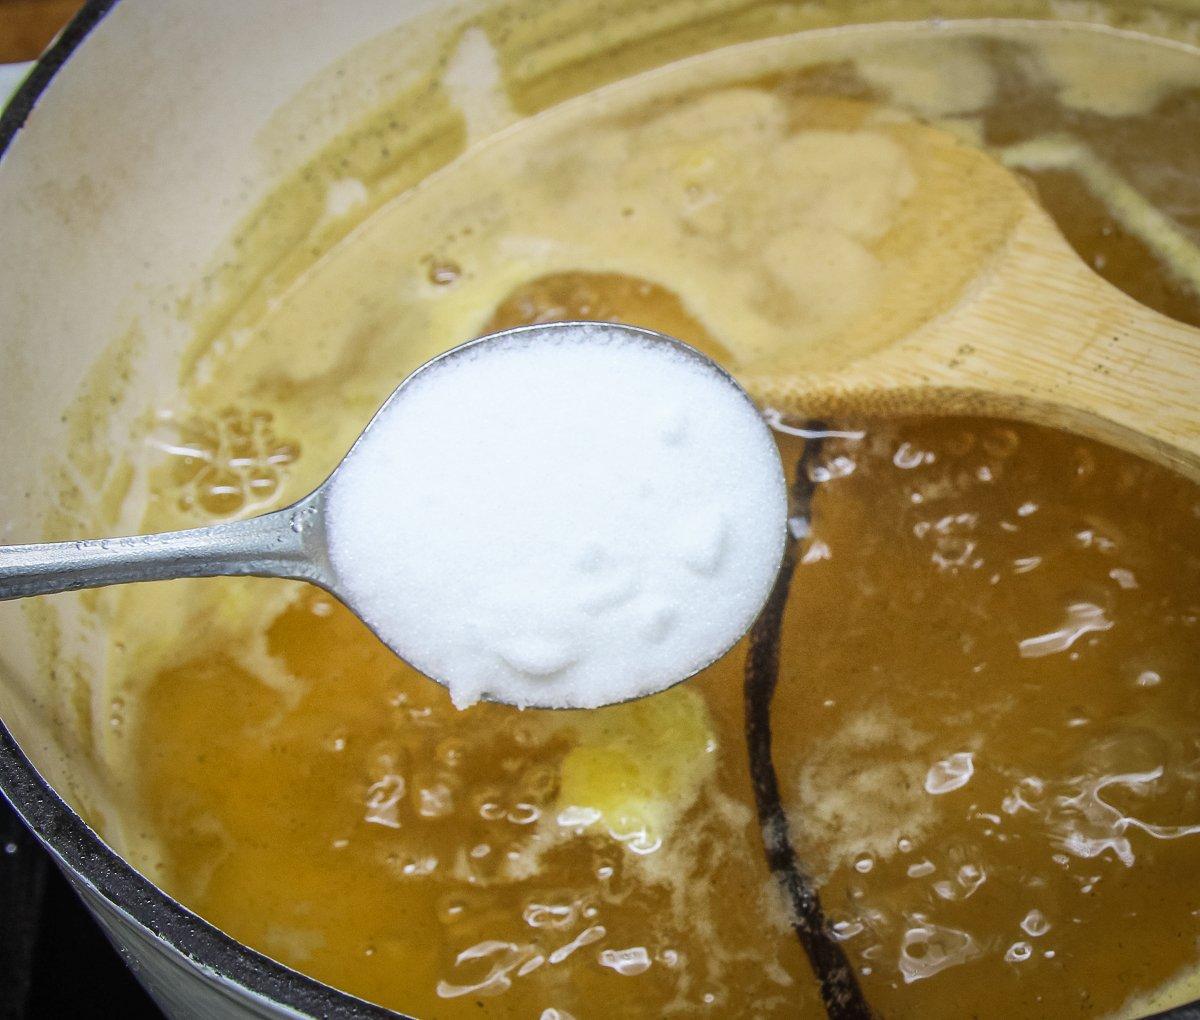 Add powdered citric acid to the syrup to brighten the flavor.